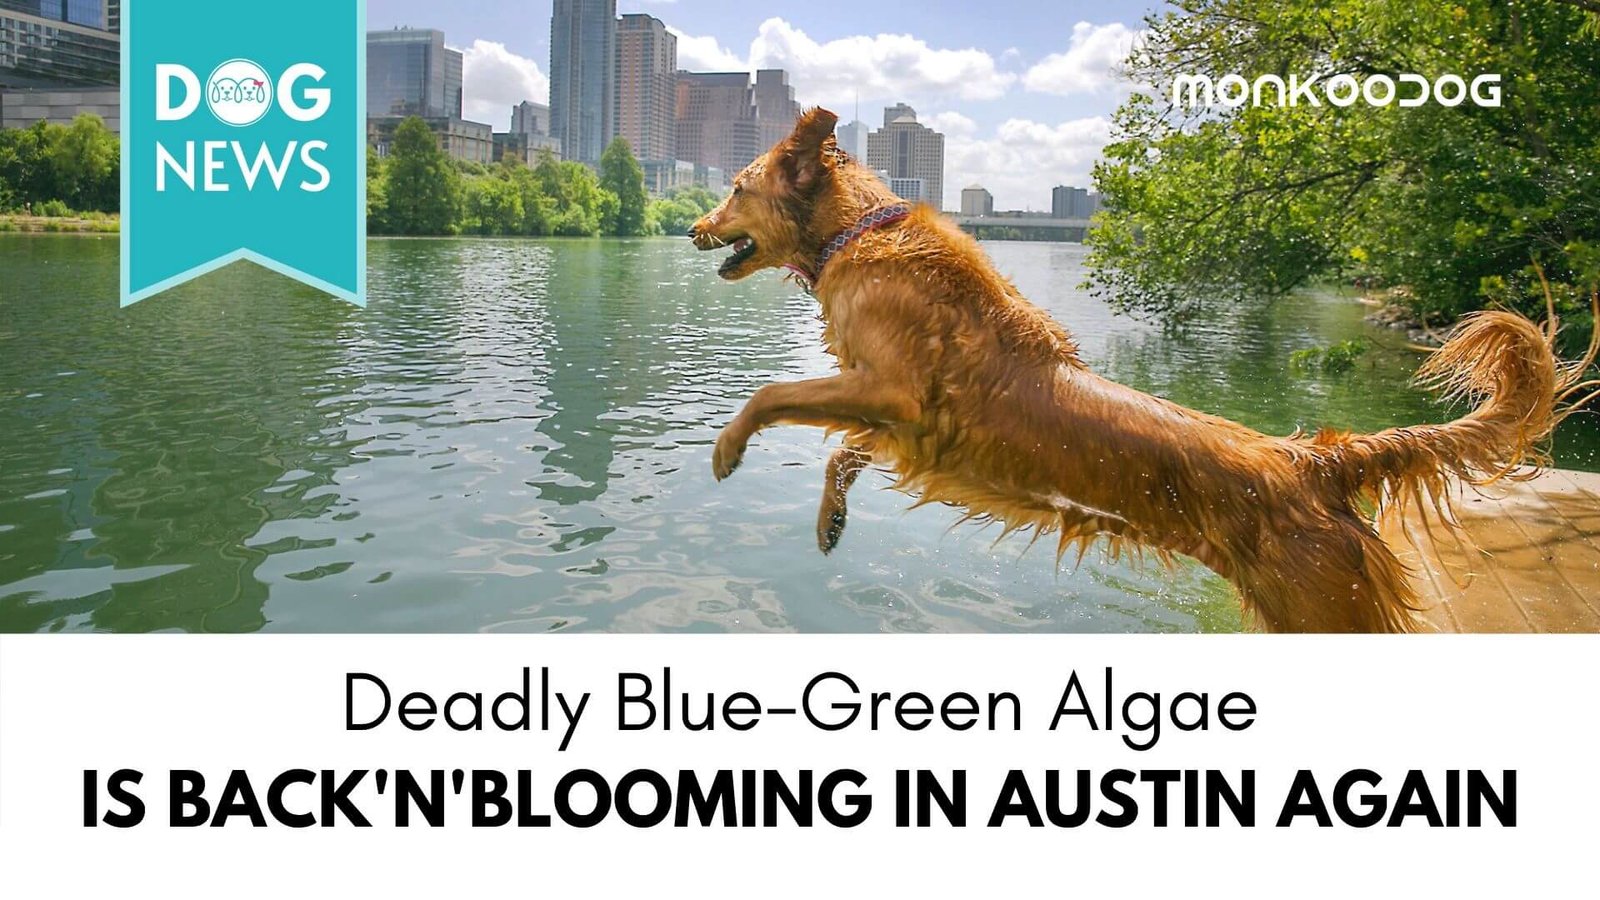 Austin’s-dog-killing-algae-seems-to-be-back-in-bloom-with-the-rising-temperature